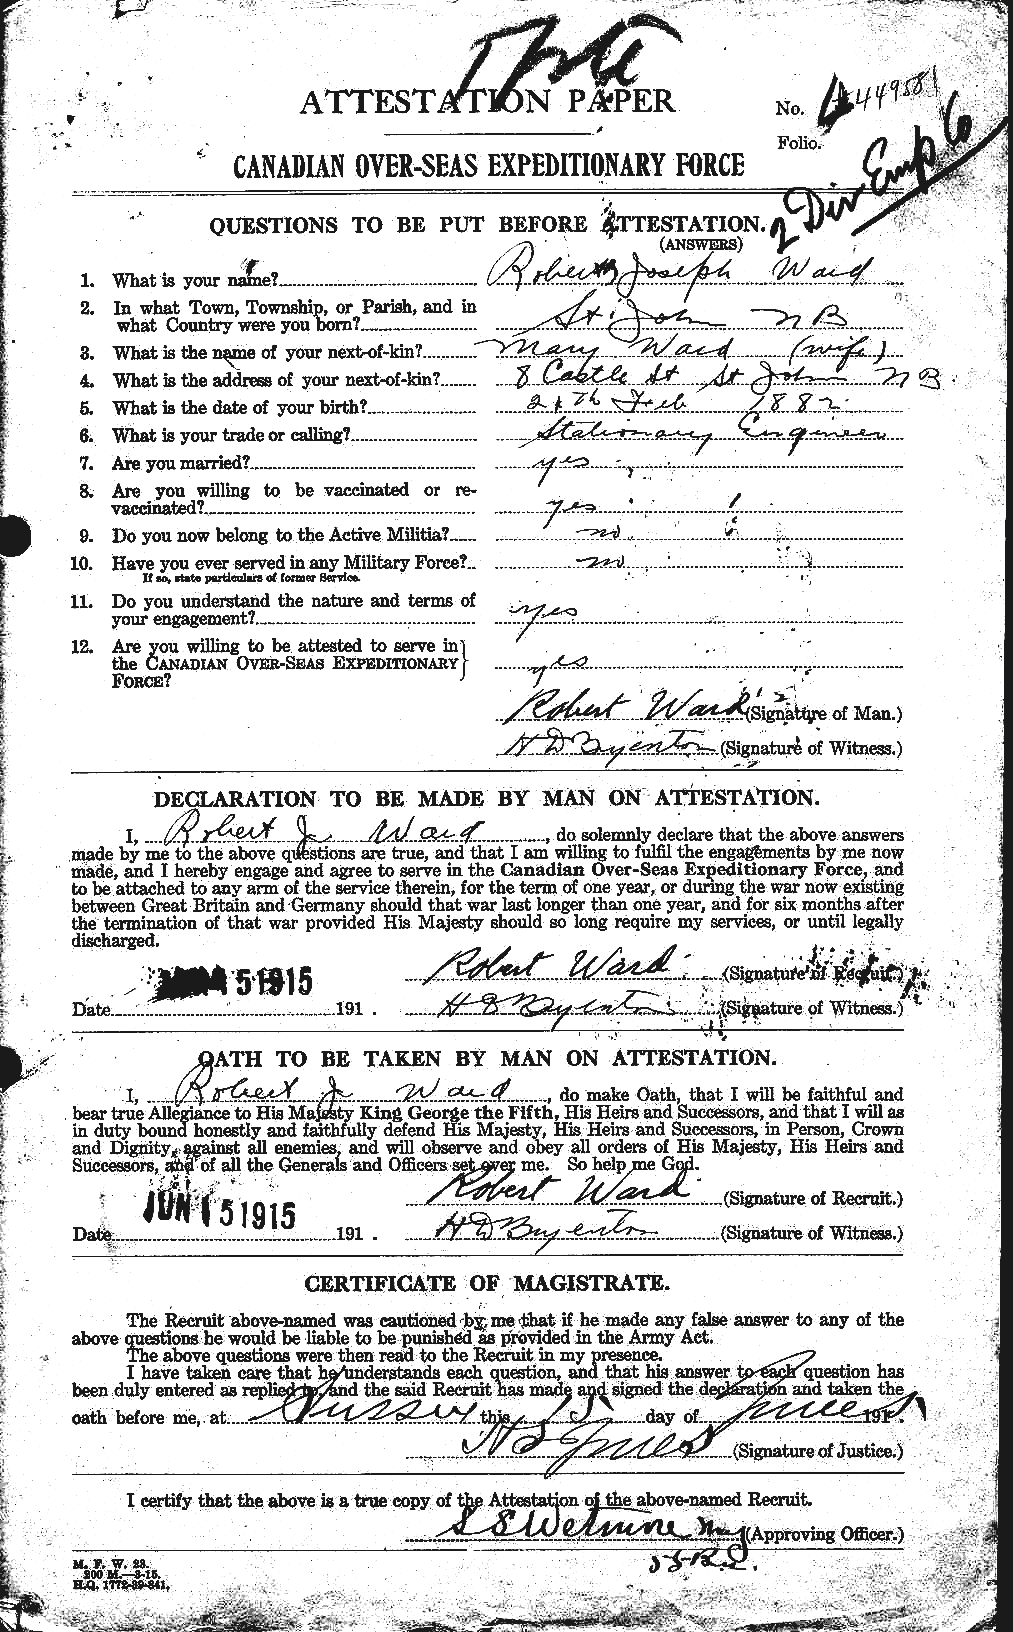 Personnel Records of the First World War - CEF 659669a